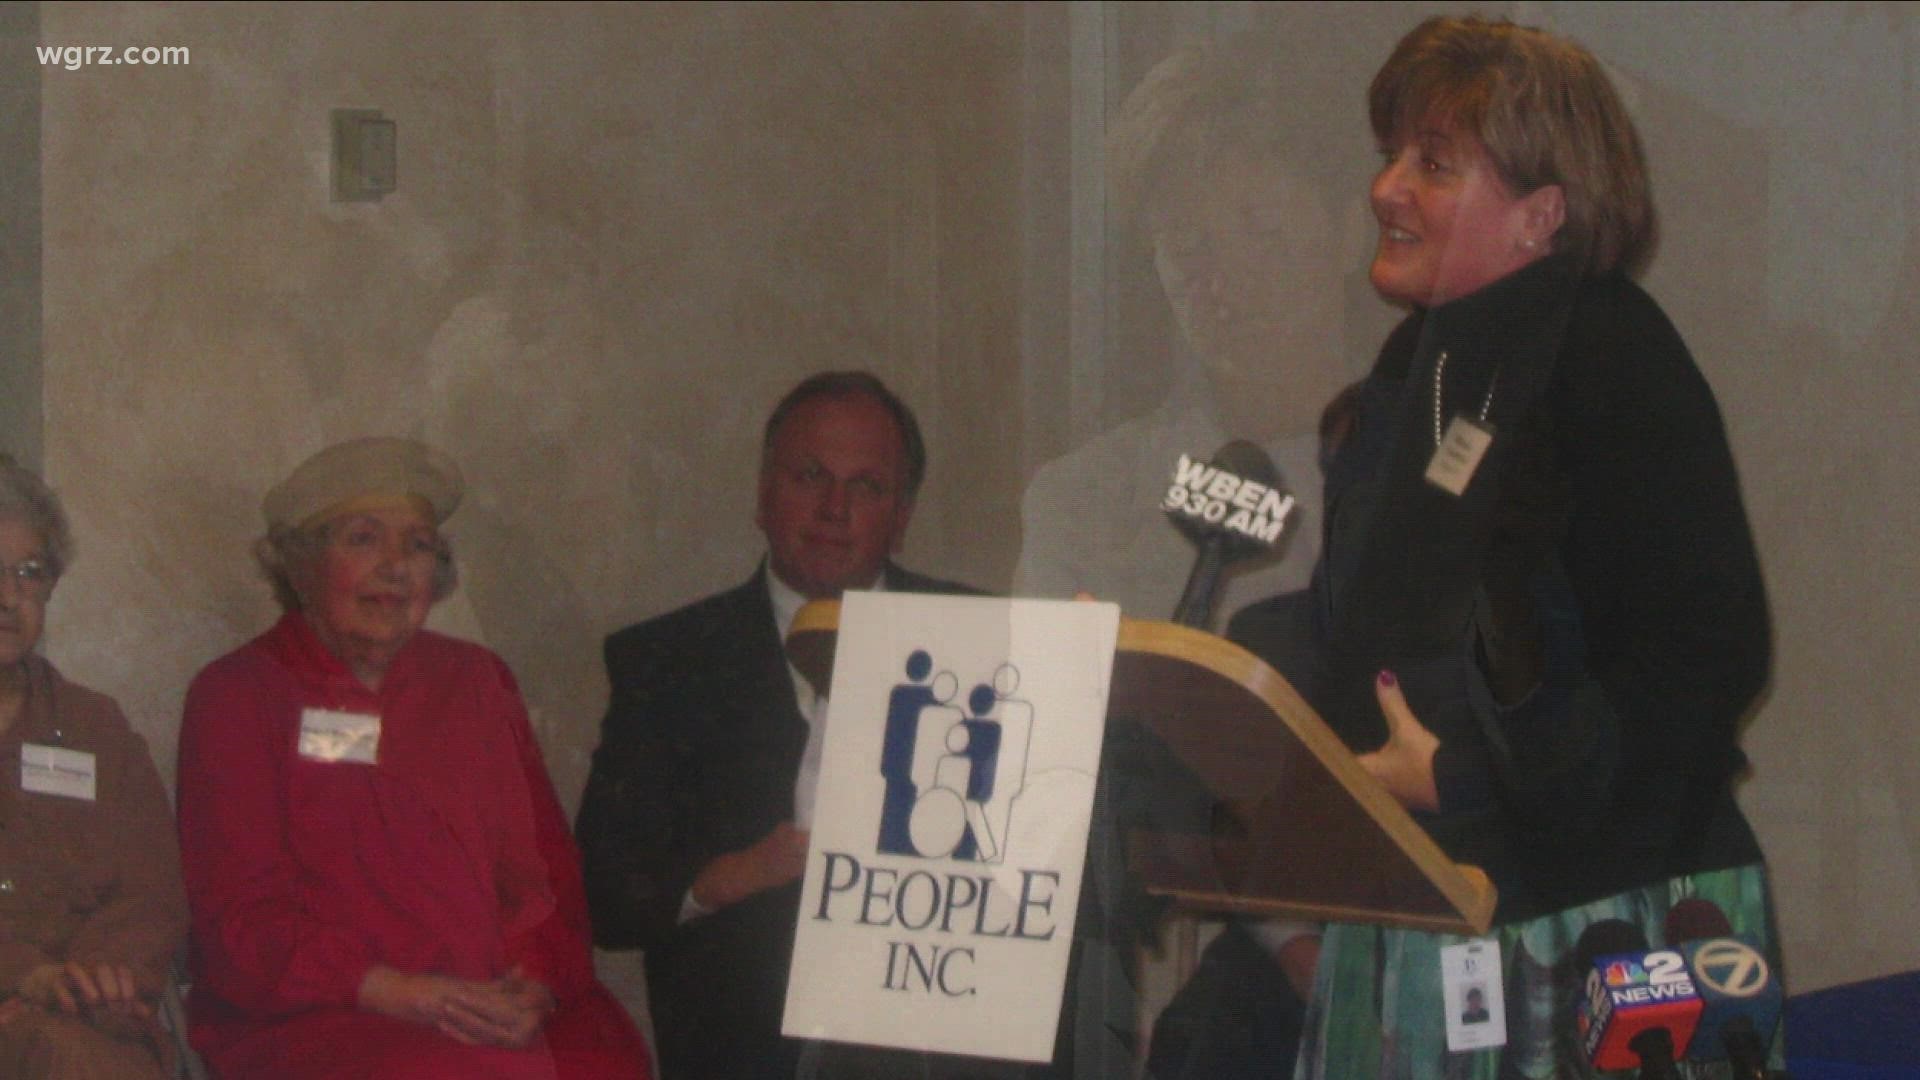 Western New York's largest human service provider, People Inc., is led by Rhonda Frederick who is being celebrated as one of the "Selfless Among Us."